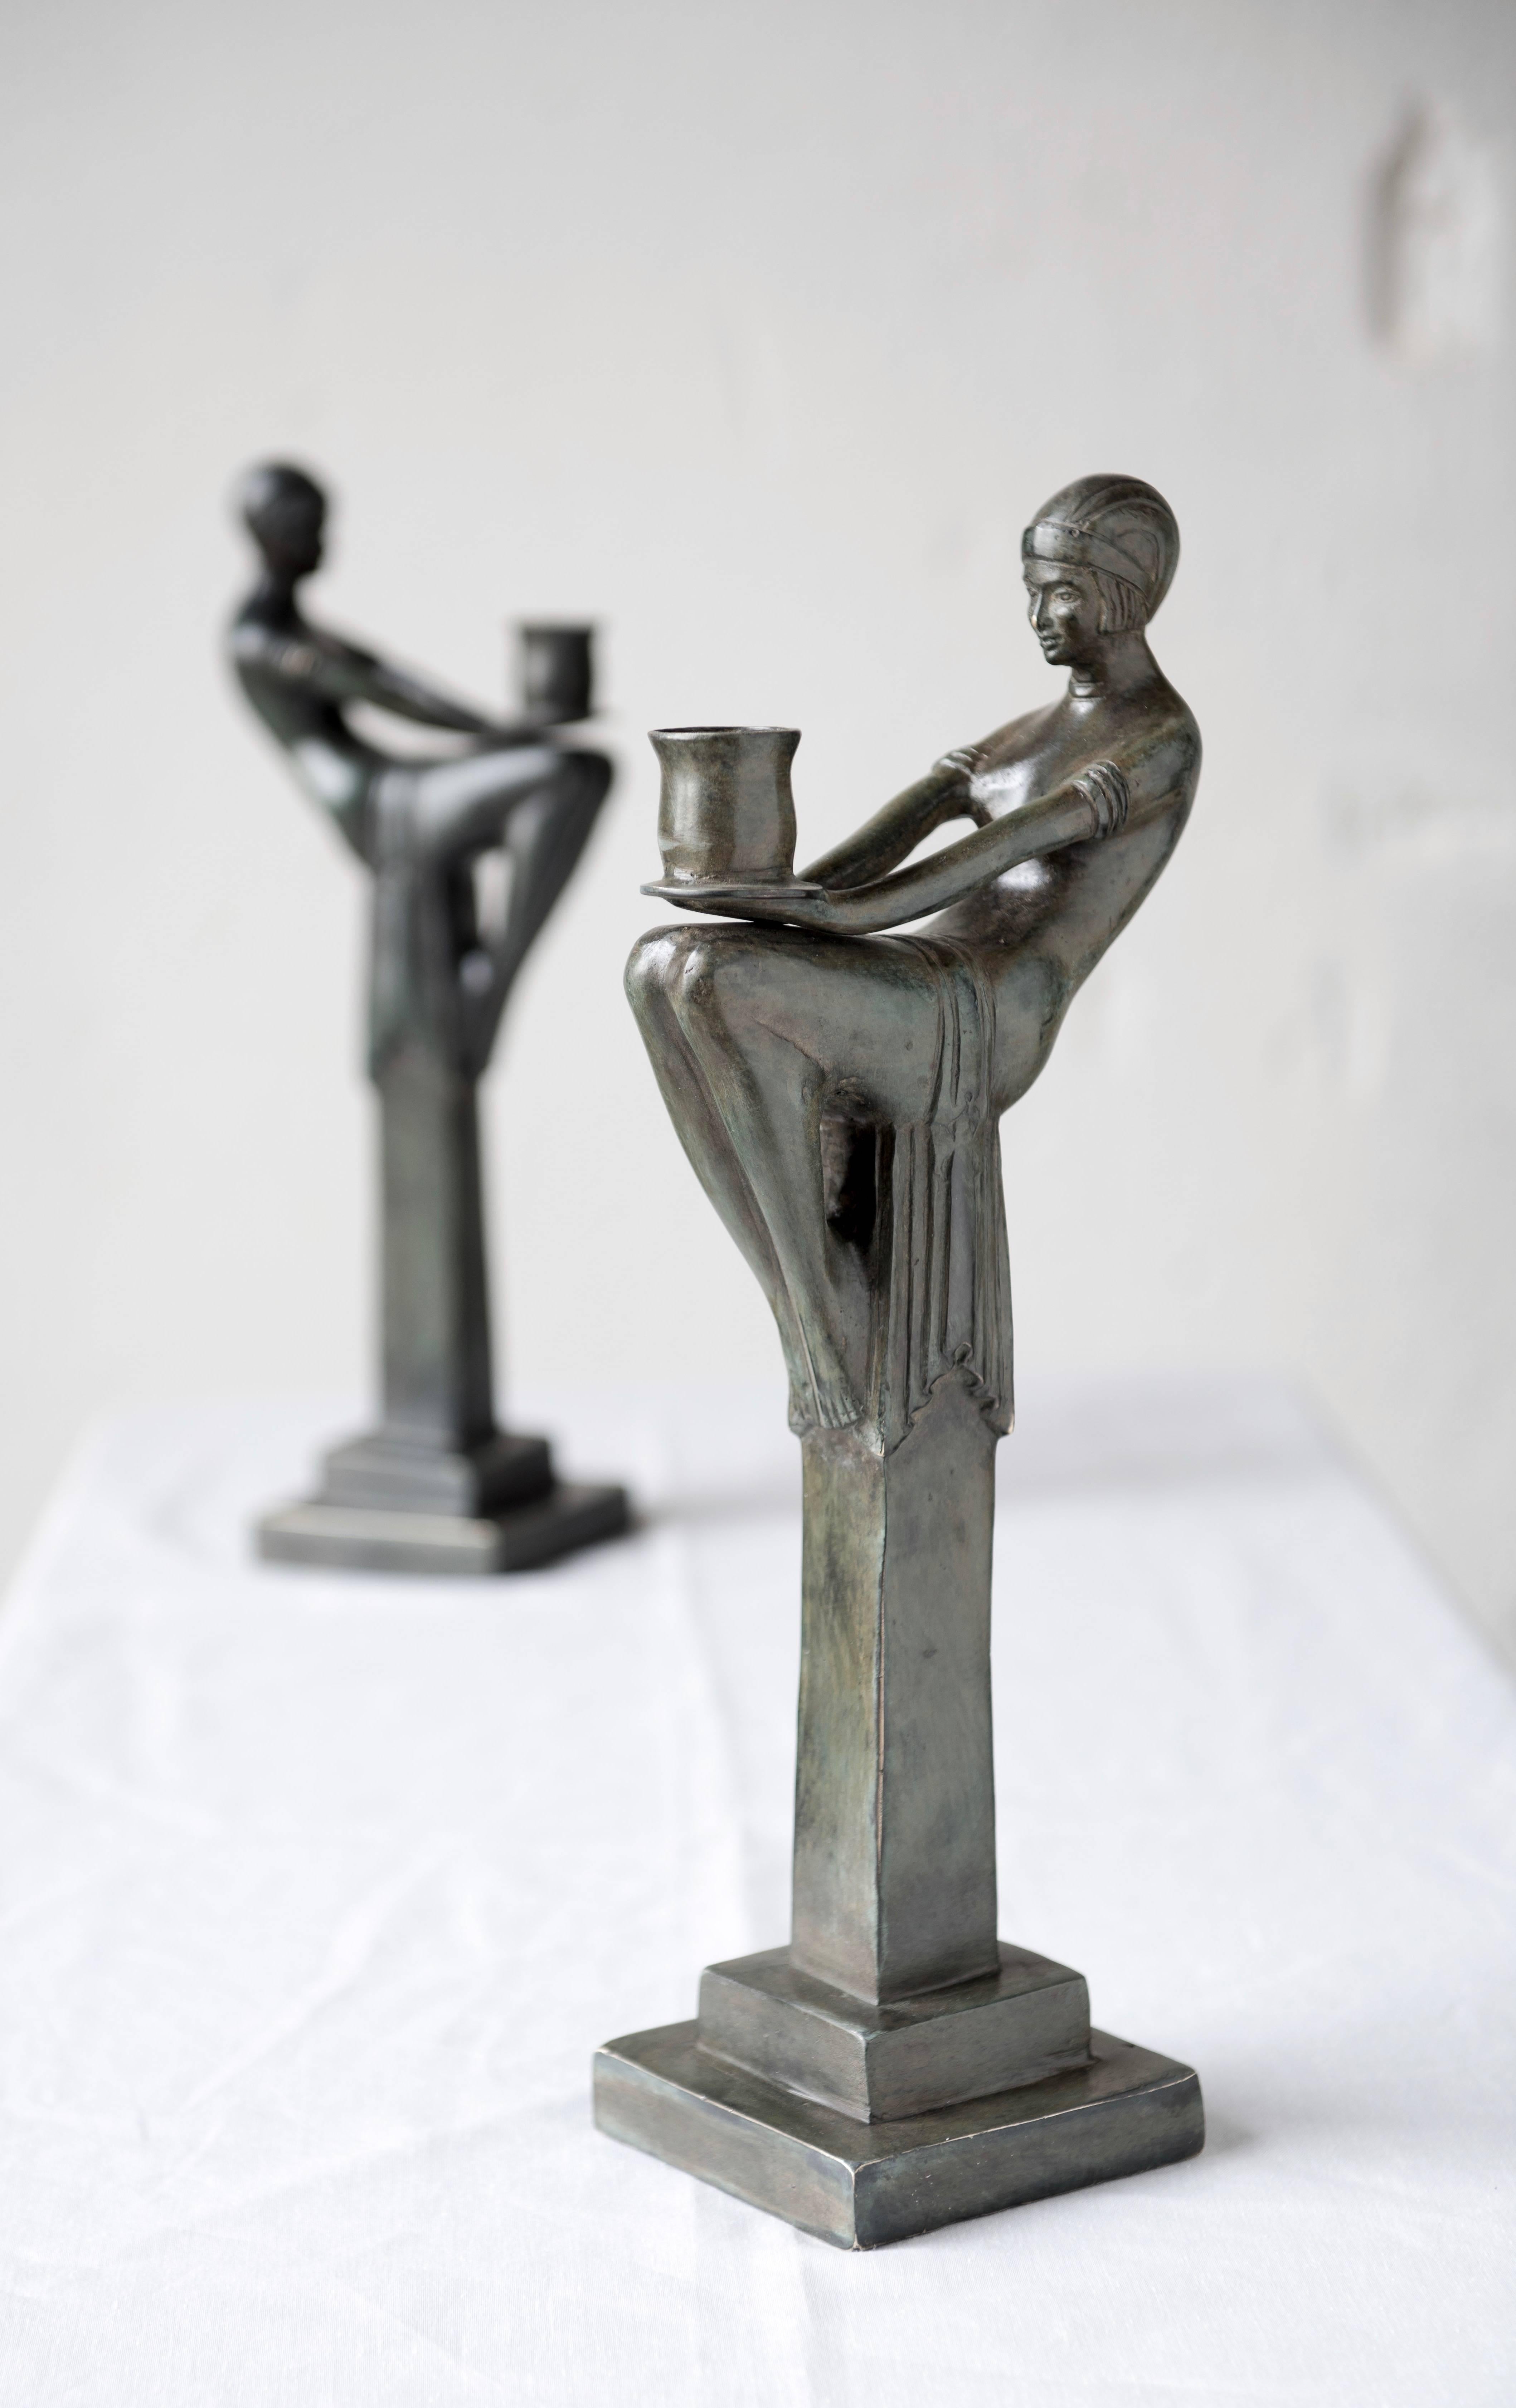 Molded Pair of Candlesticks in Patinated Bronze Art Deco Style